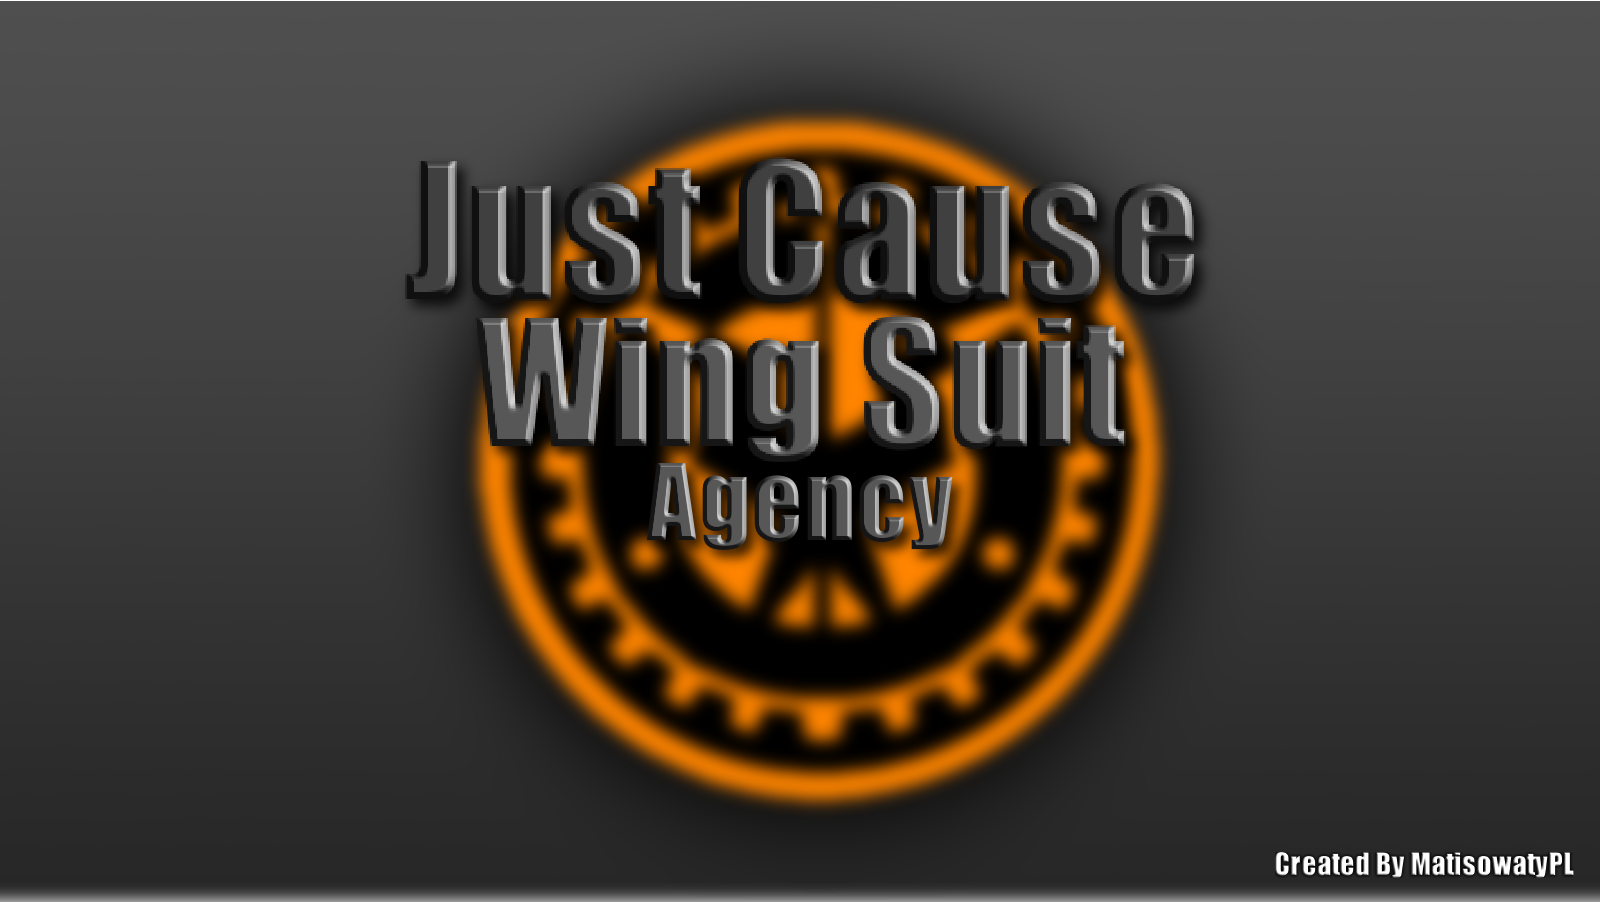 Just Cause 3 Agency Wing Suit